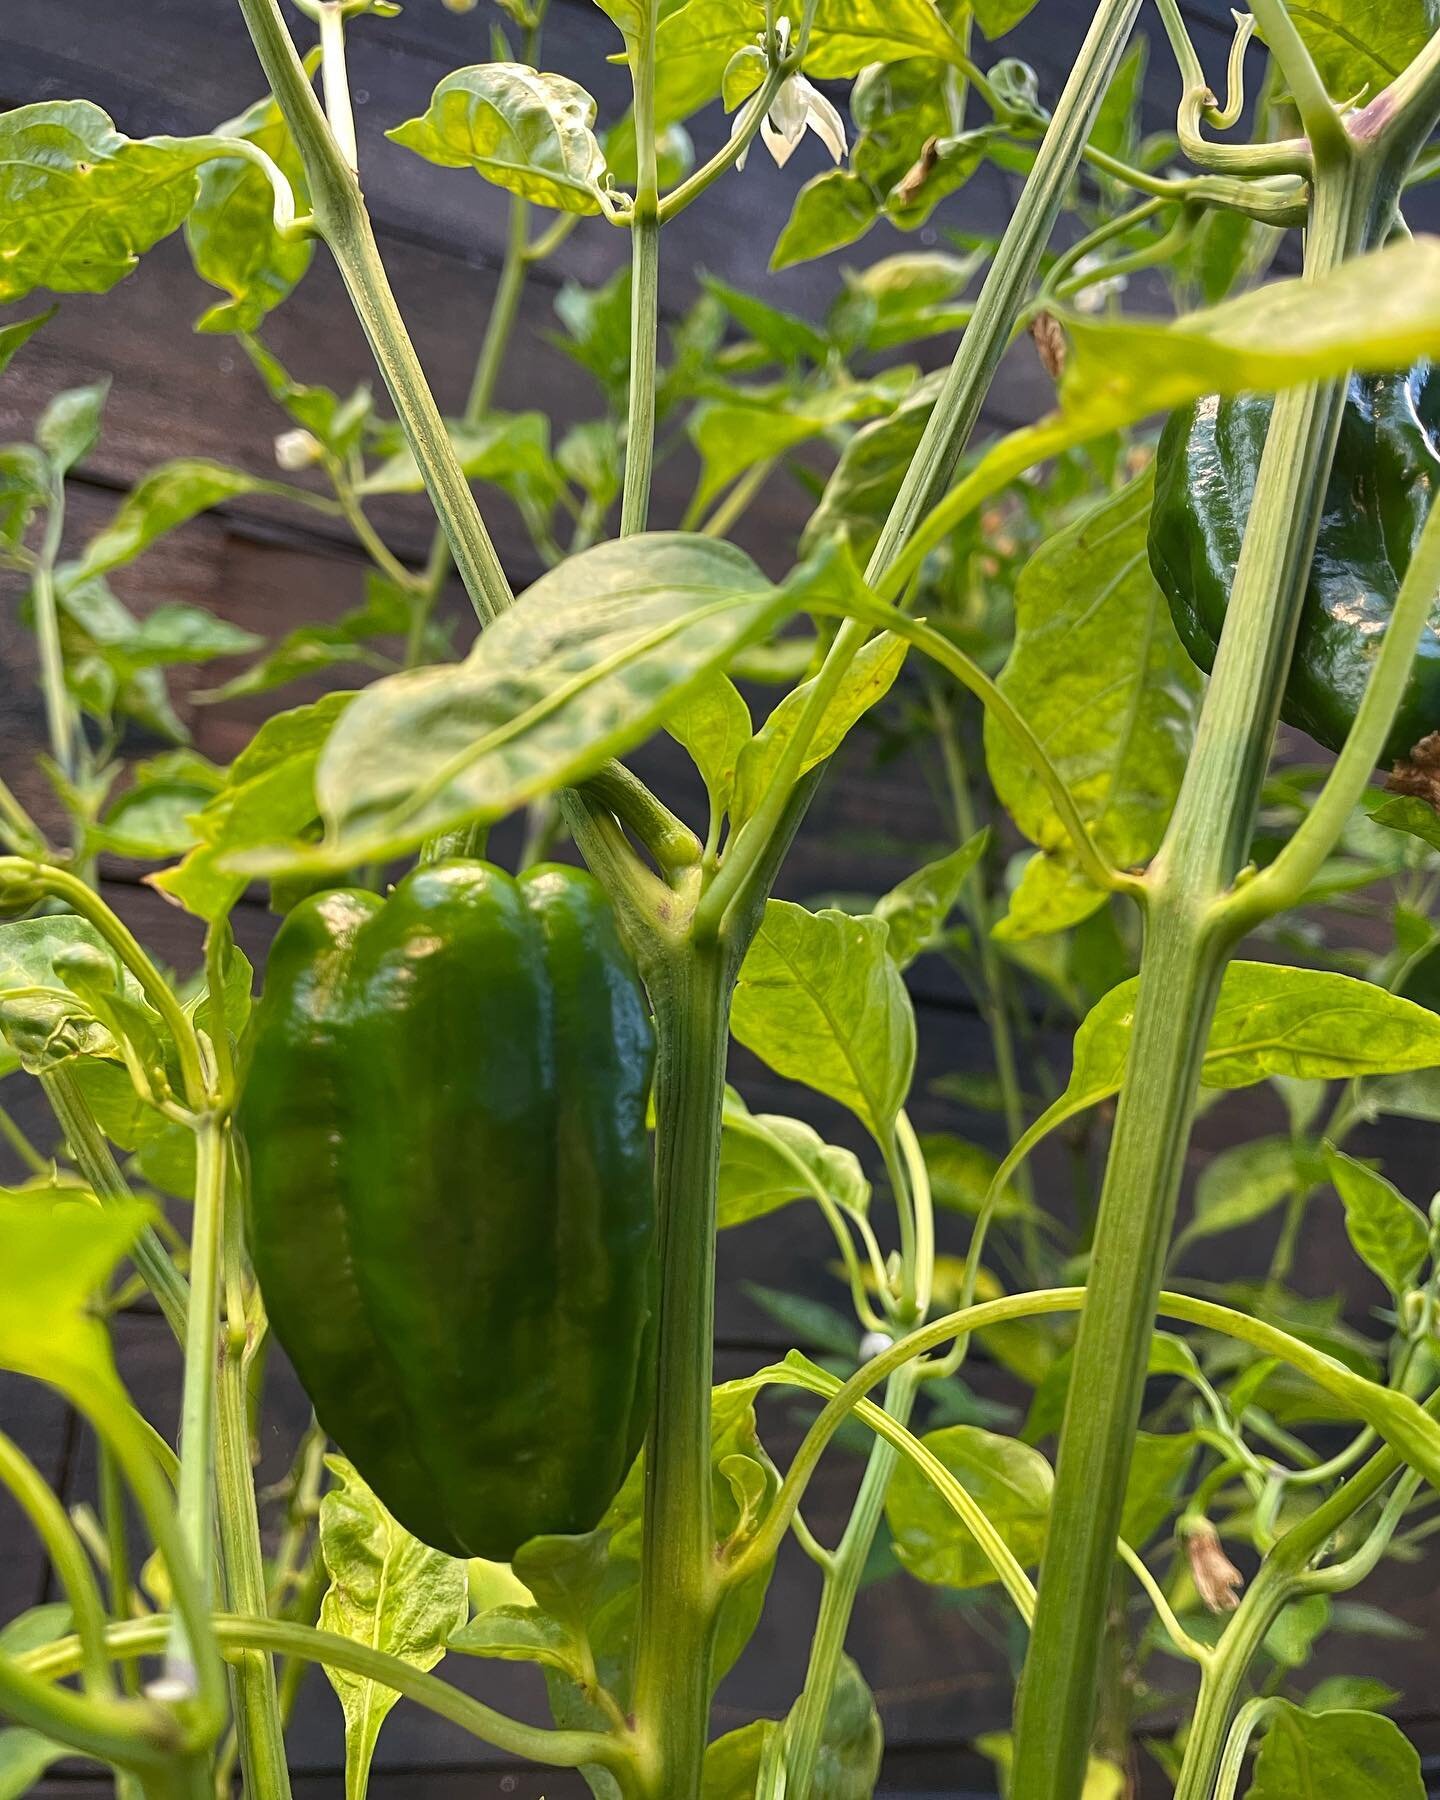 Padron Peppers are usually used for tapas in Spain, but I&rsquo;m growing them! 

Who remembers the Ol&eacute; sauce? Good news! I&rsquo;ll be making it this year. It will be a limited edition sauce with Pepper Queen grown Padron peppers, Jalape&ntil